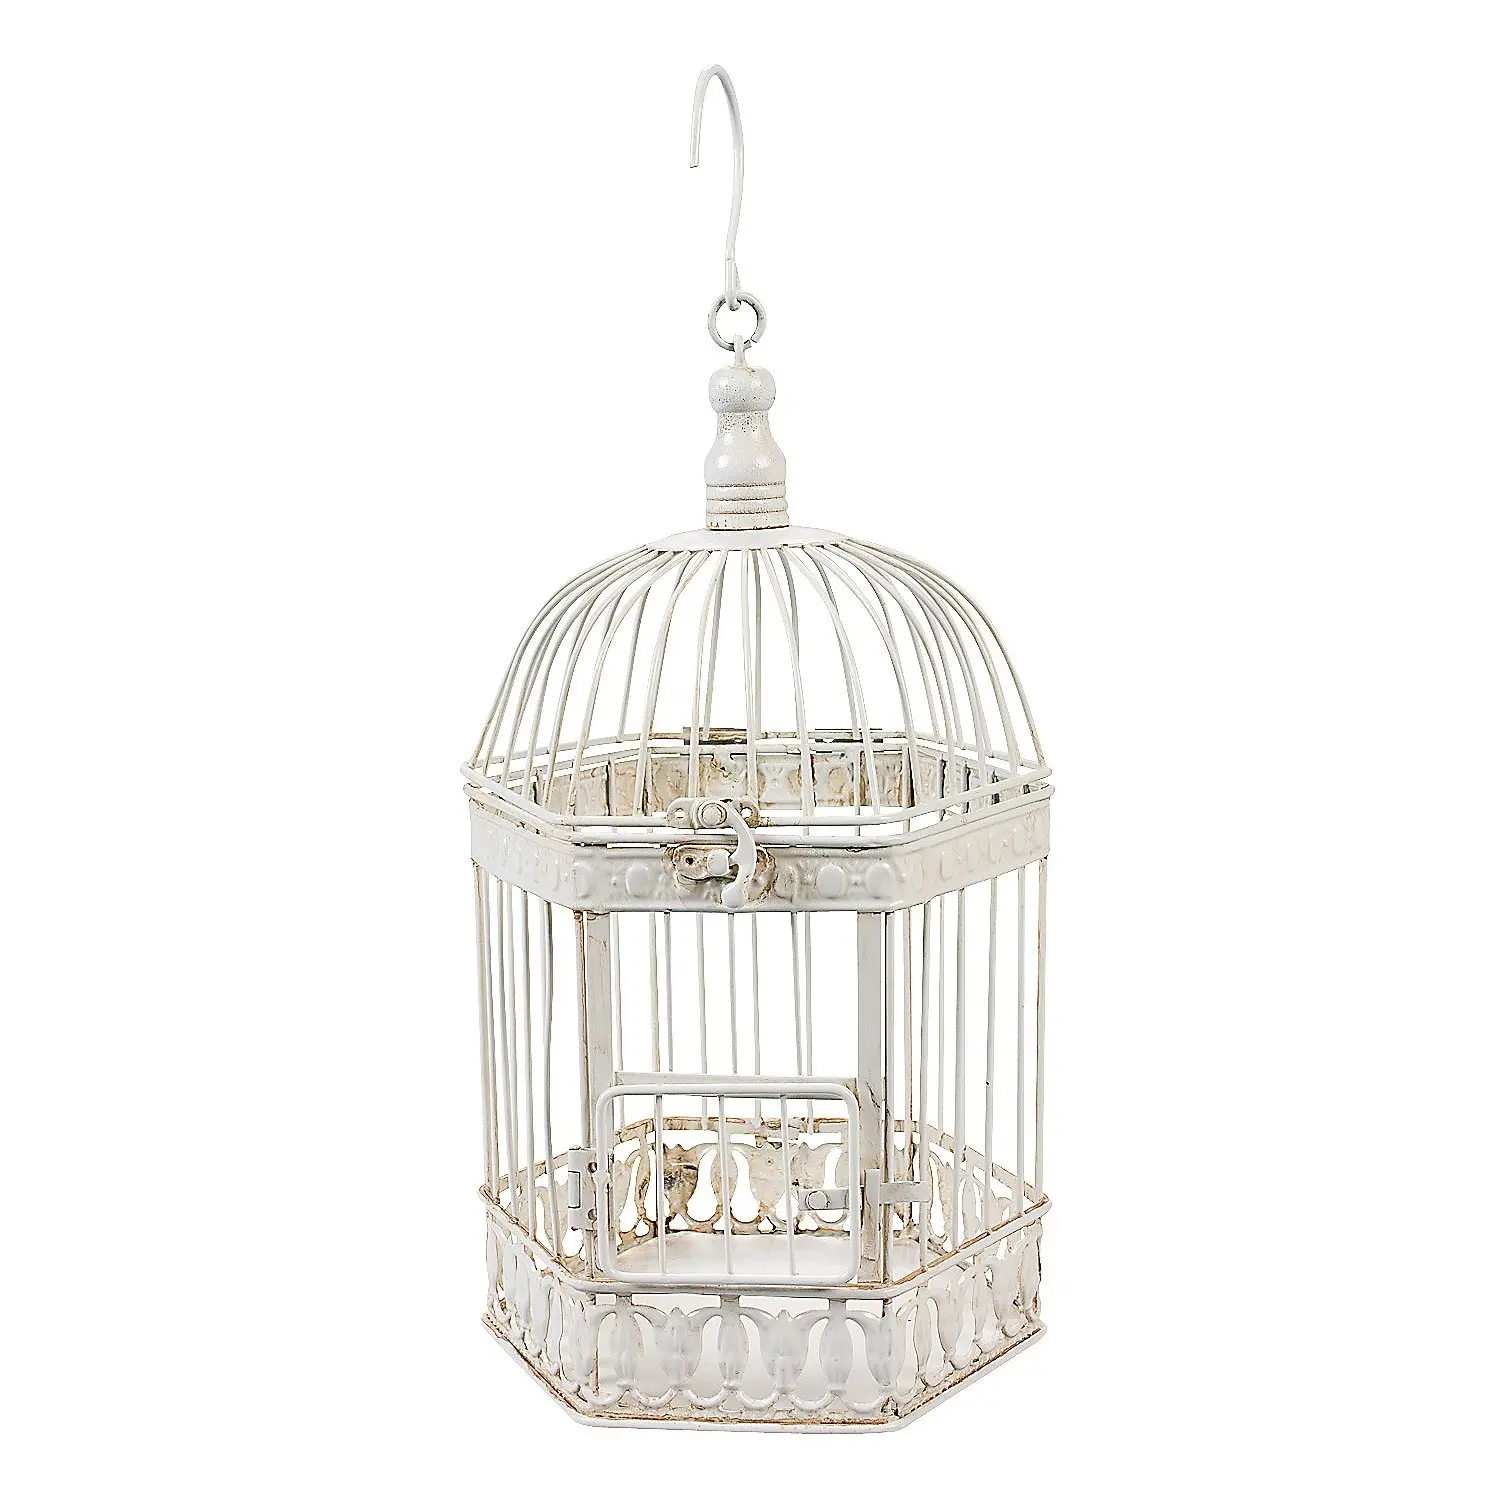 Cheap Bird Cage For Decoration, find Bird Cage For Decoration deals on ...